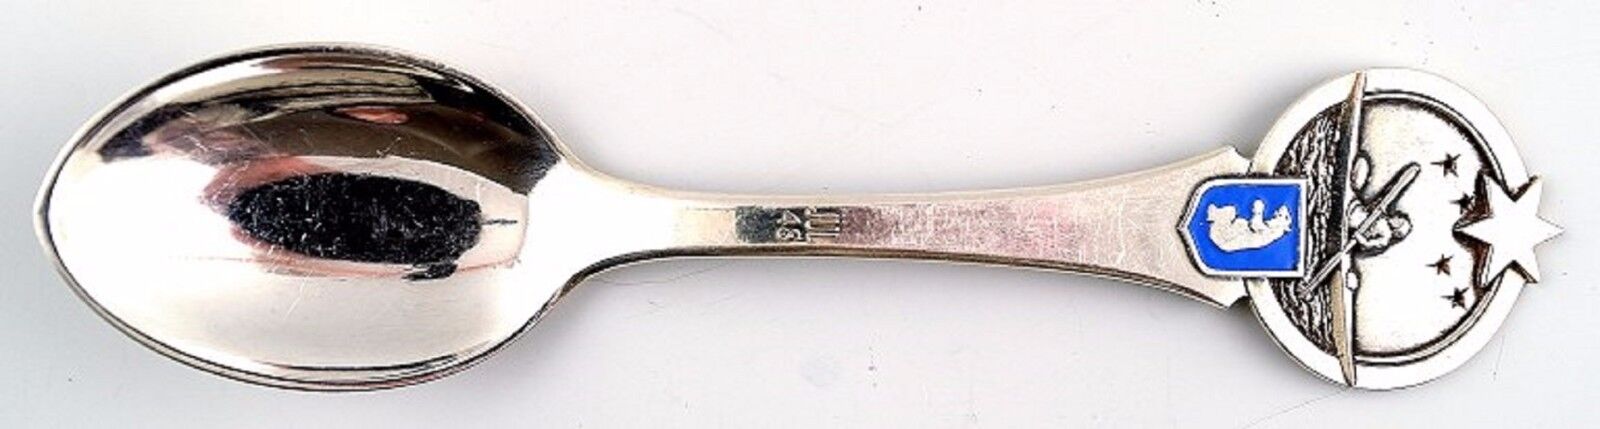 2 Christmas Spoons from 1948. Produced by Grann and Laglye, Copenhagen.